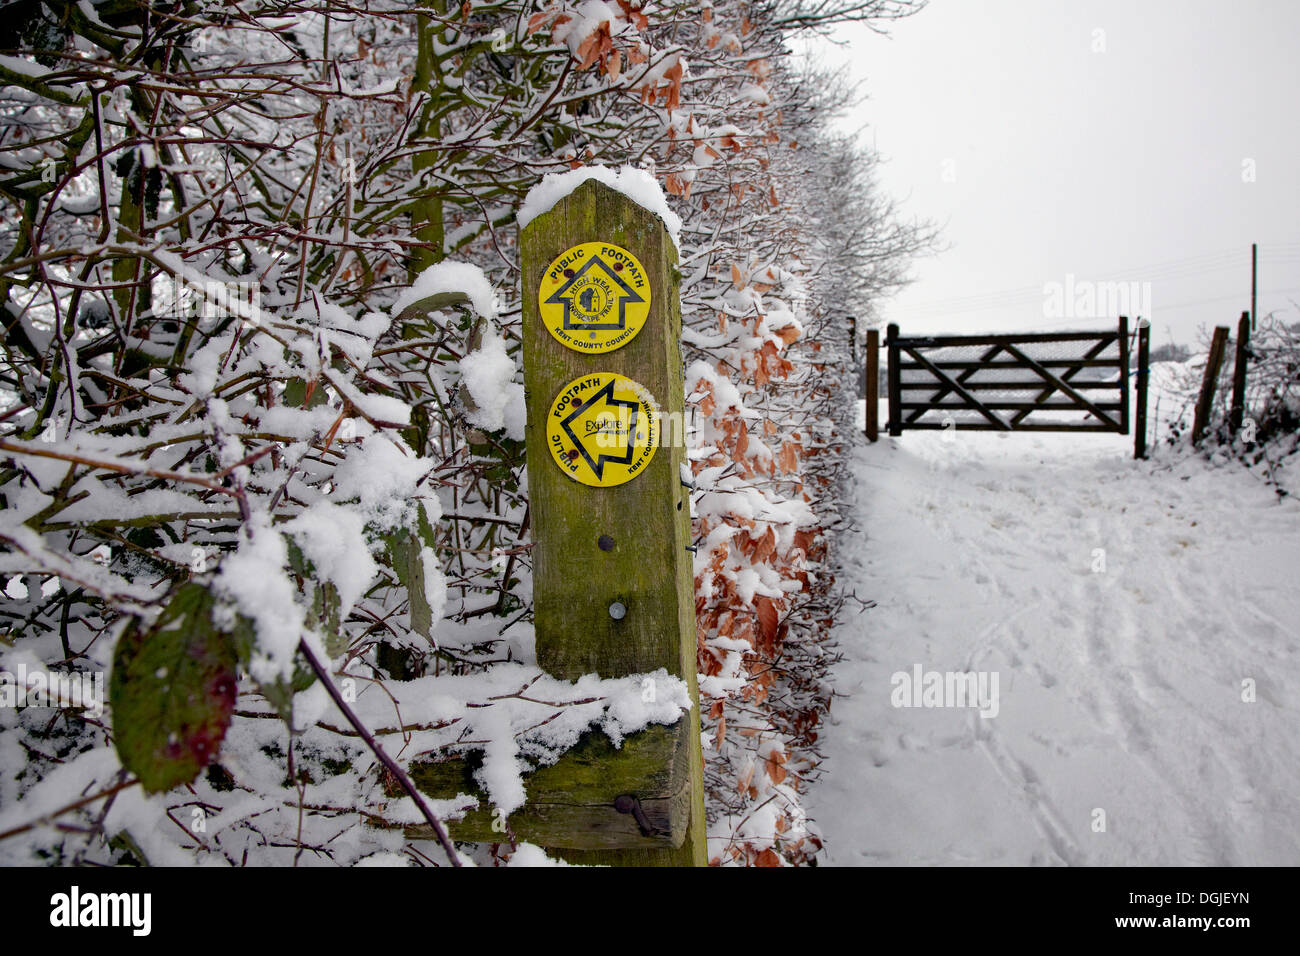 Footpath sign in snow. Stock Photo